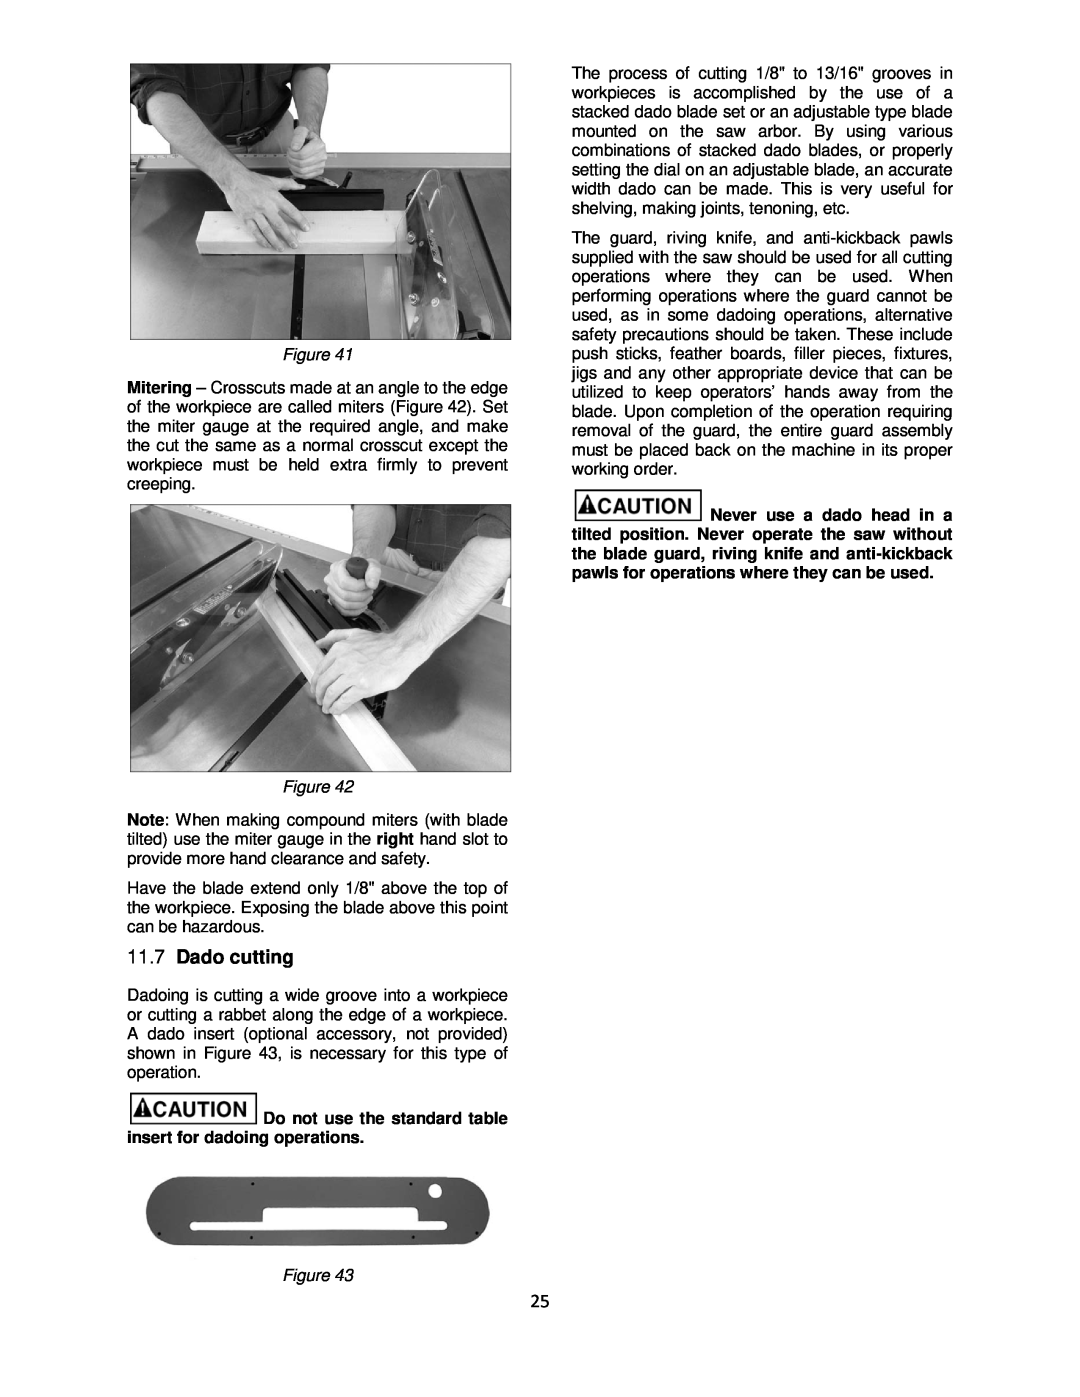 Powermatic 64B operating instructions Dado cutting, Do not use the standard table insert for dadoing operations 